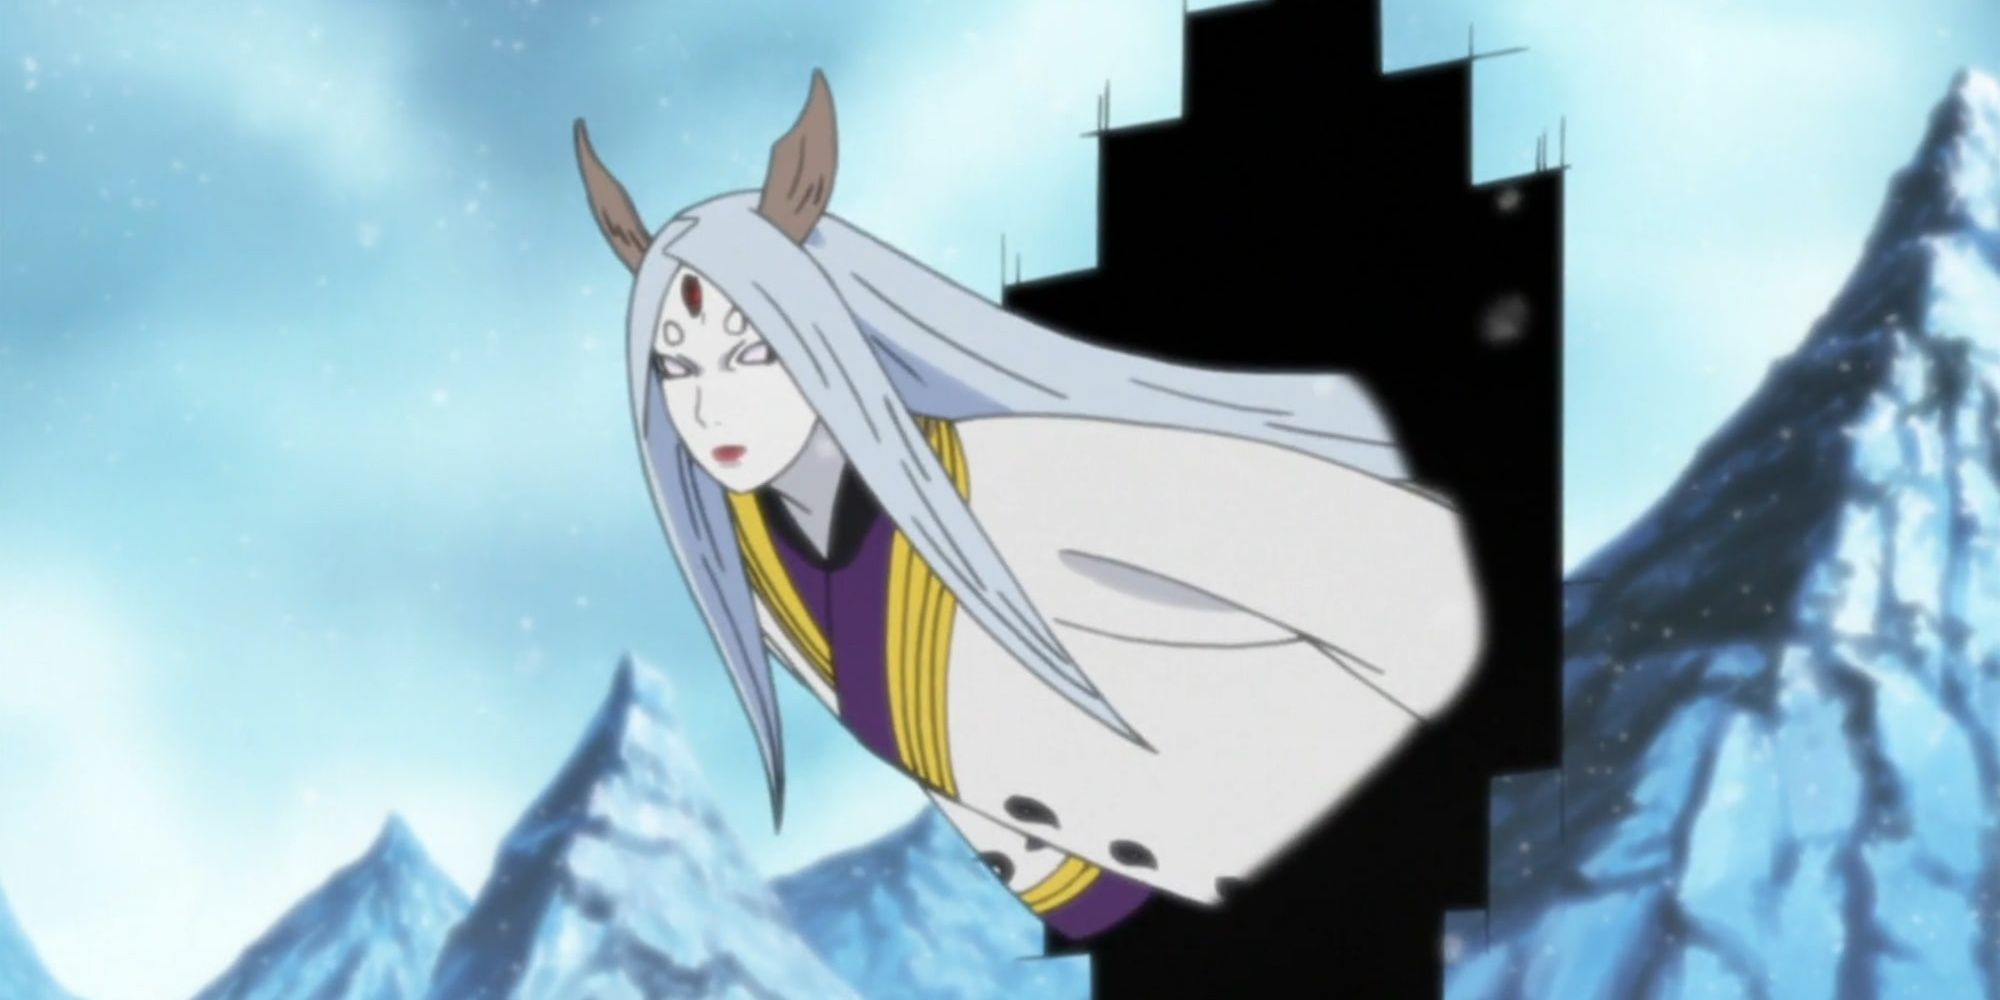 Kaguya coming from a dimensional rift in Naruto